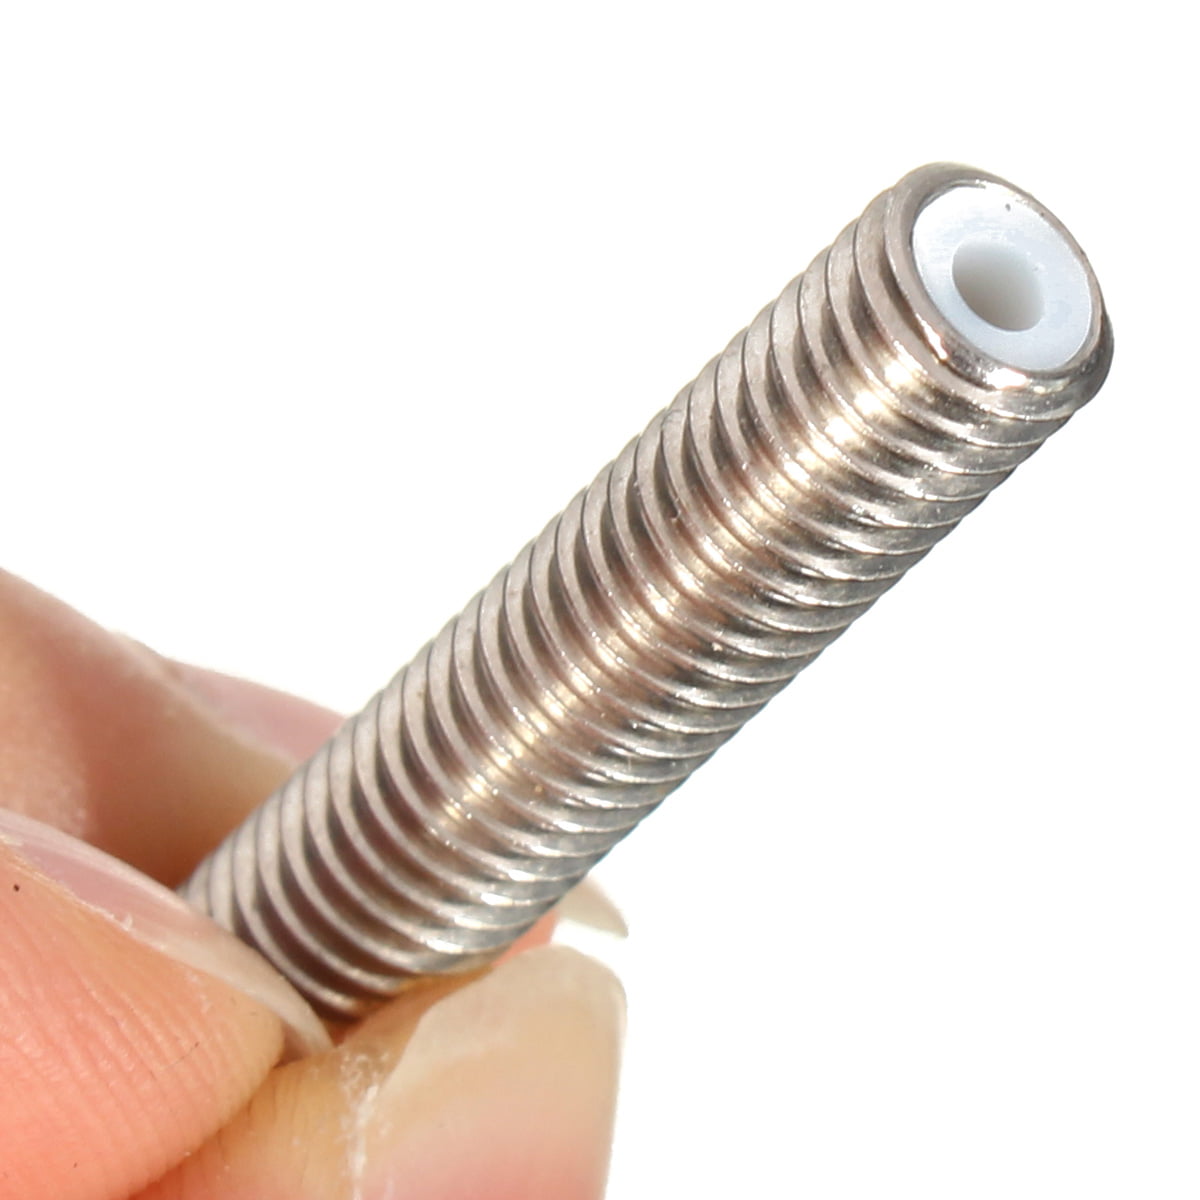 M6X30 1.75mm Nozzle Throat With/Without Teflon For 3D Printer 